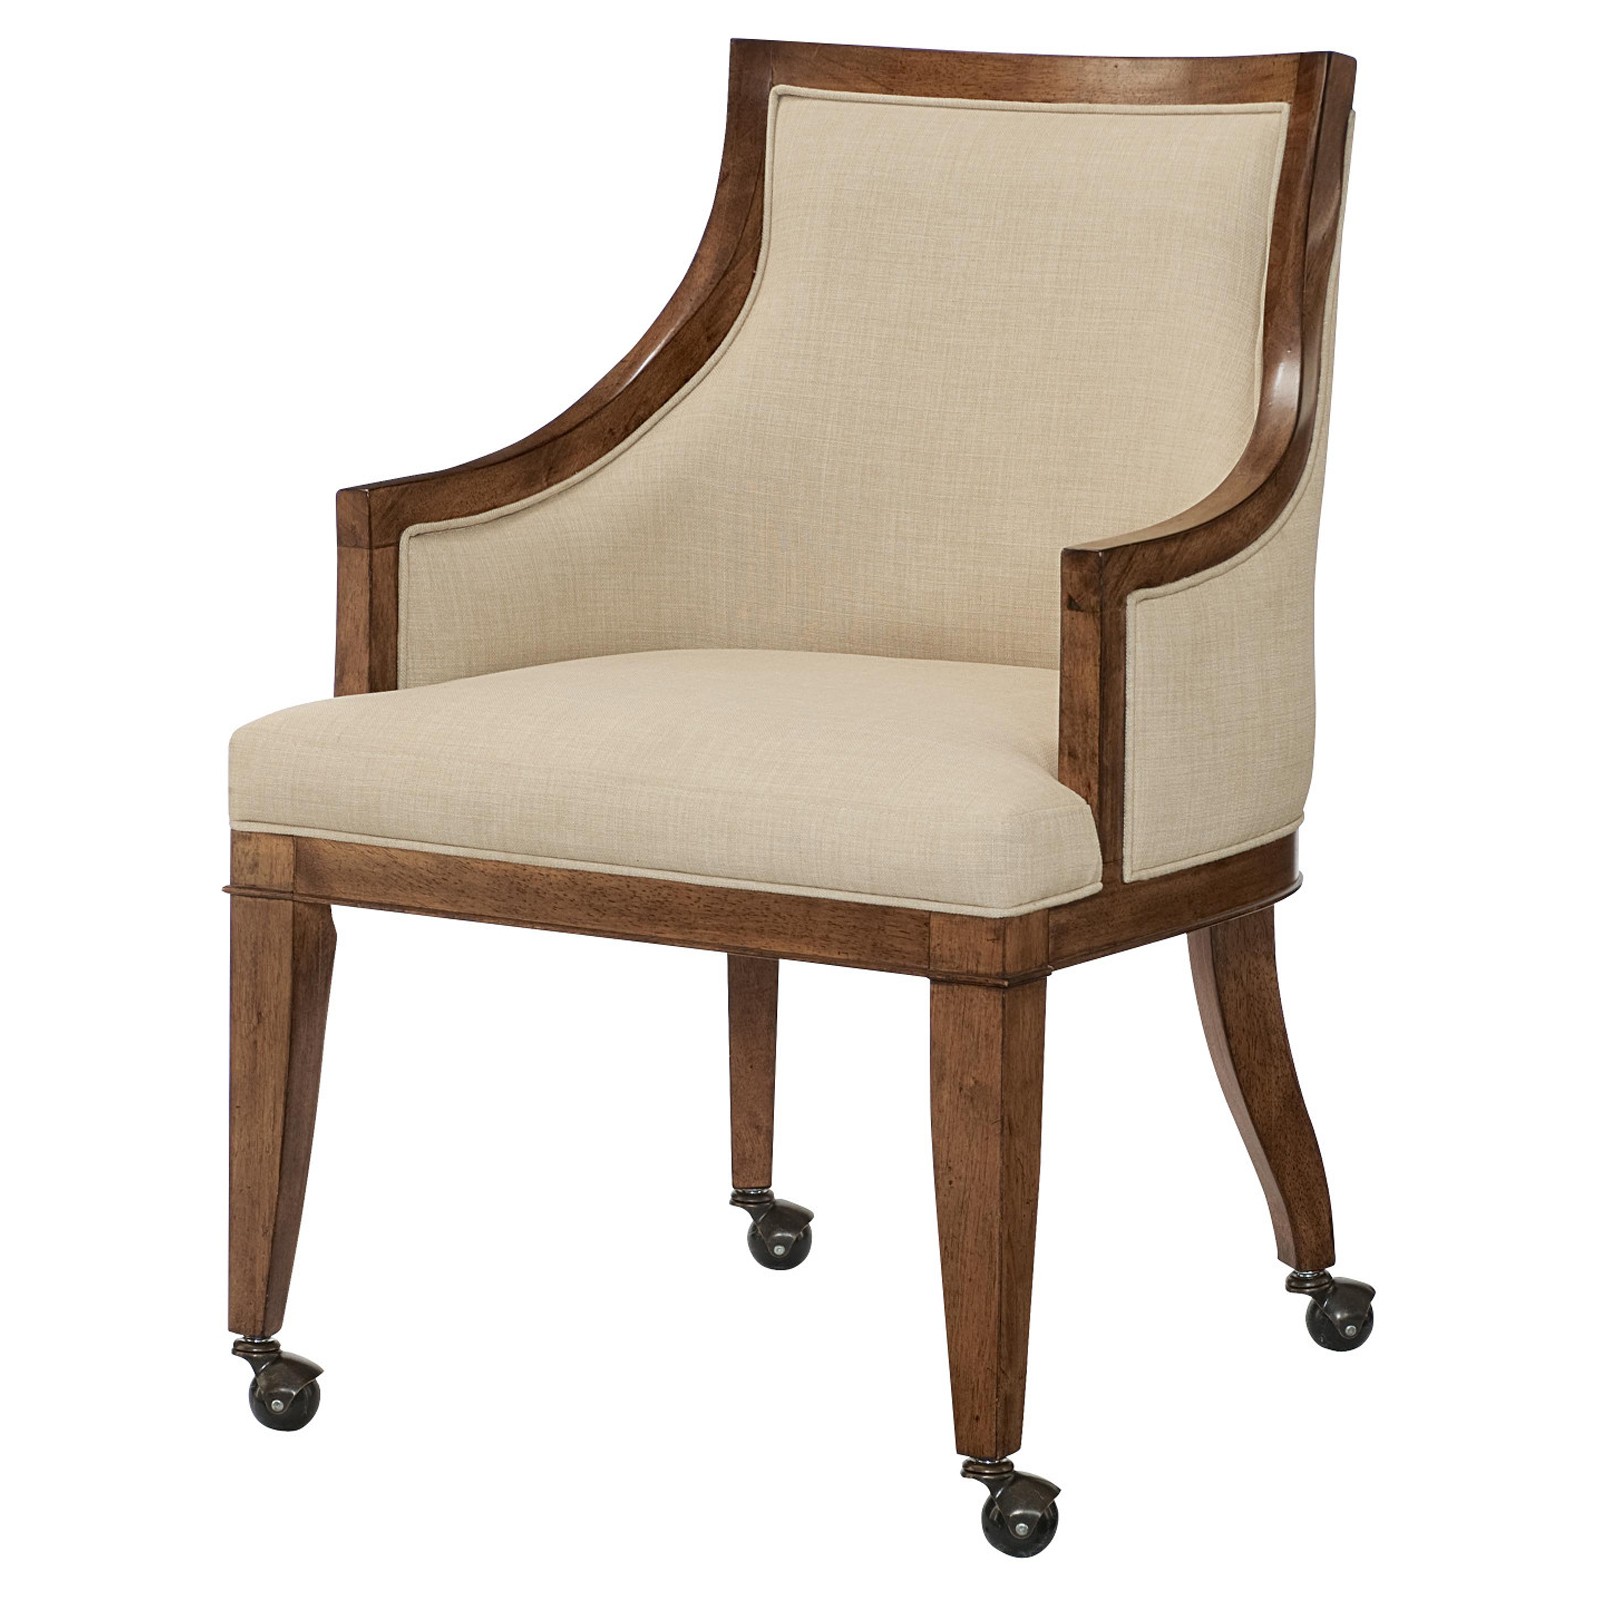 Grove point upholstered dining arm chair with casters